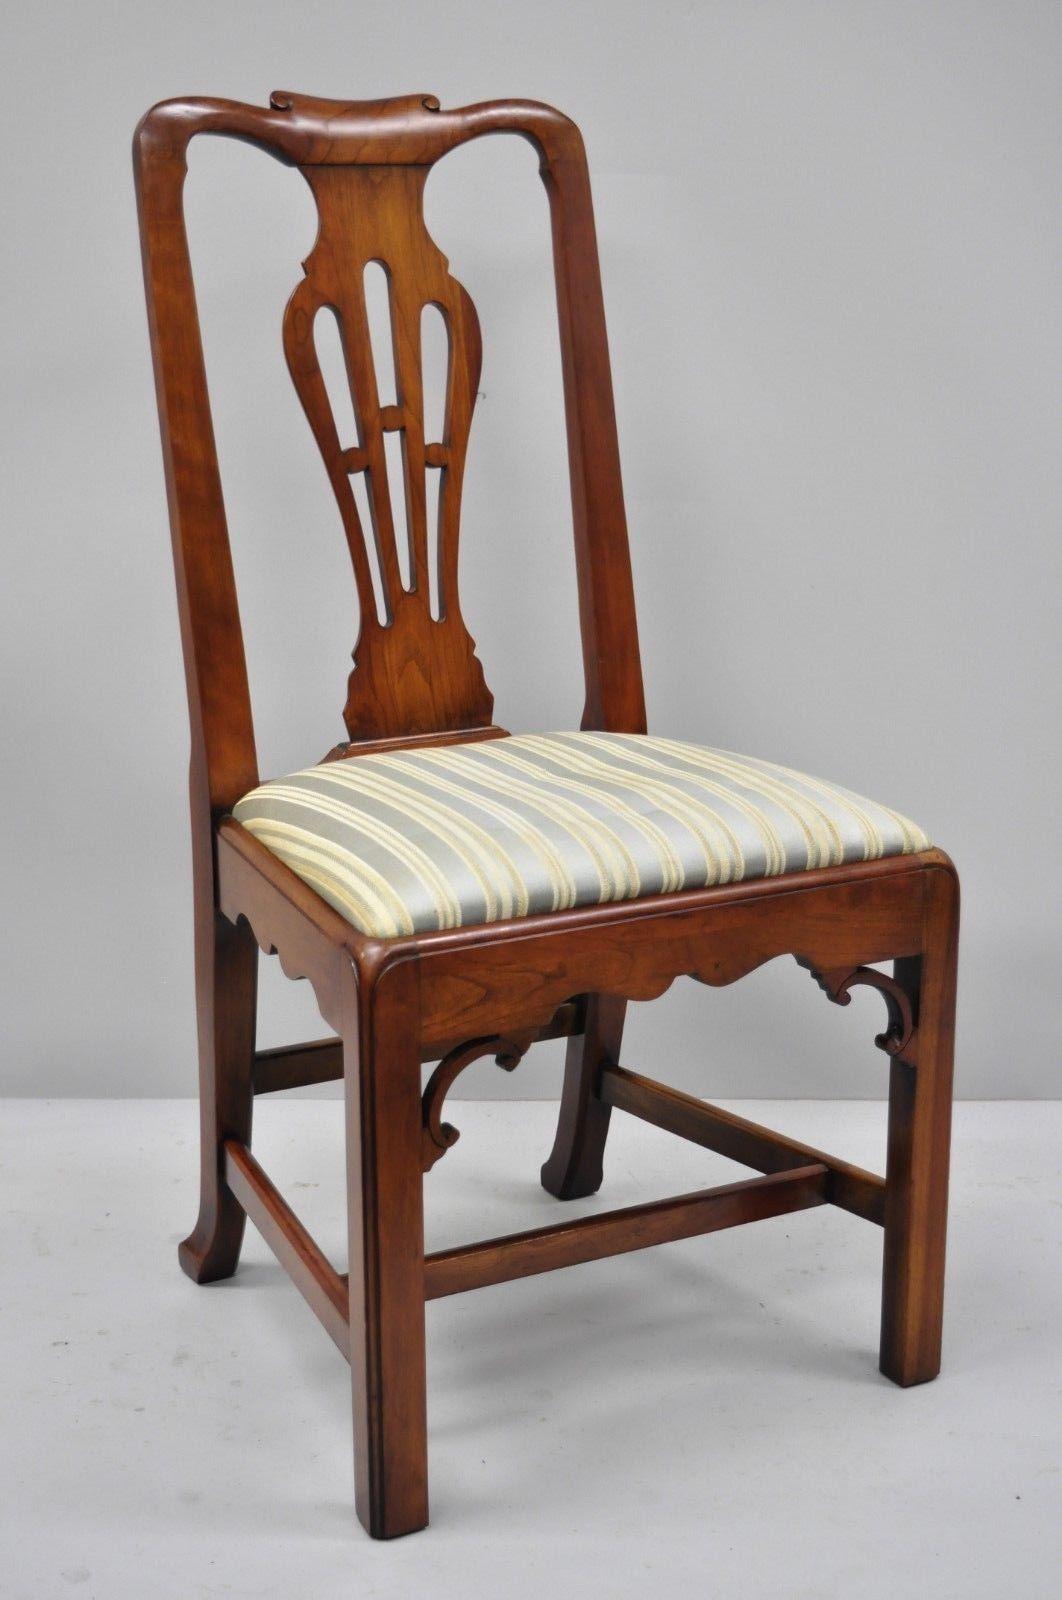 6 Statton Centennial Cherry Chippendale Style Dining Chairs for Duckloe 2